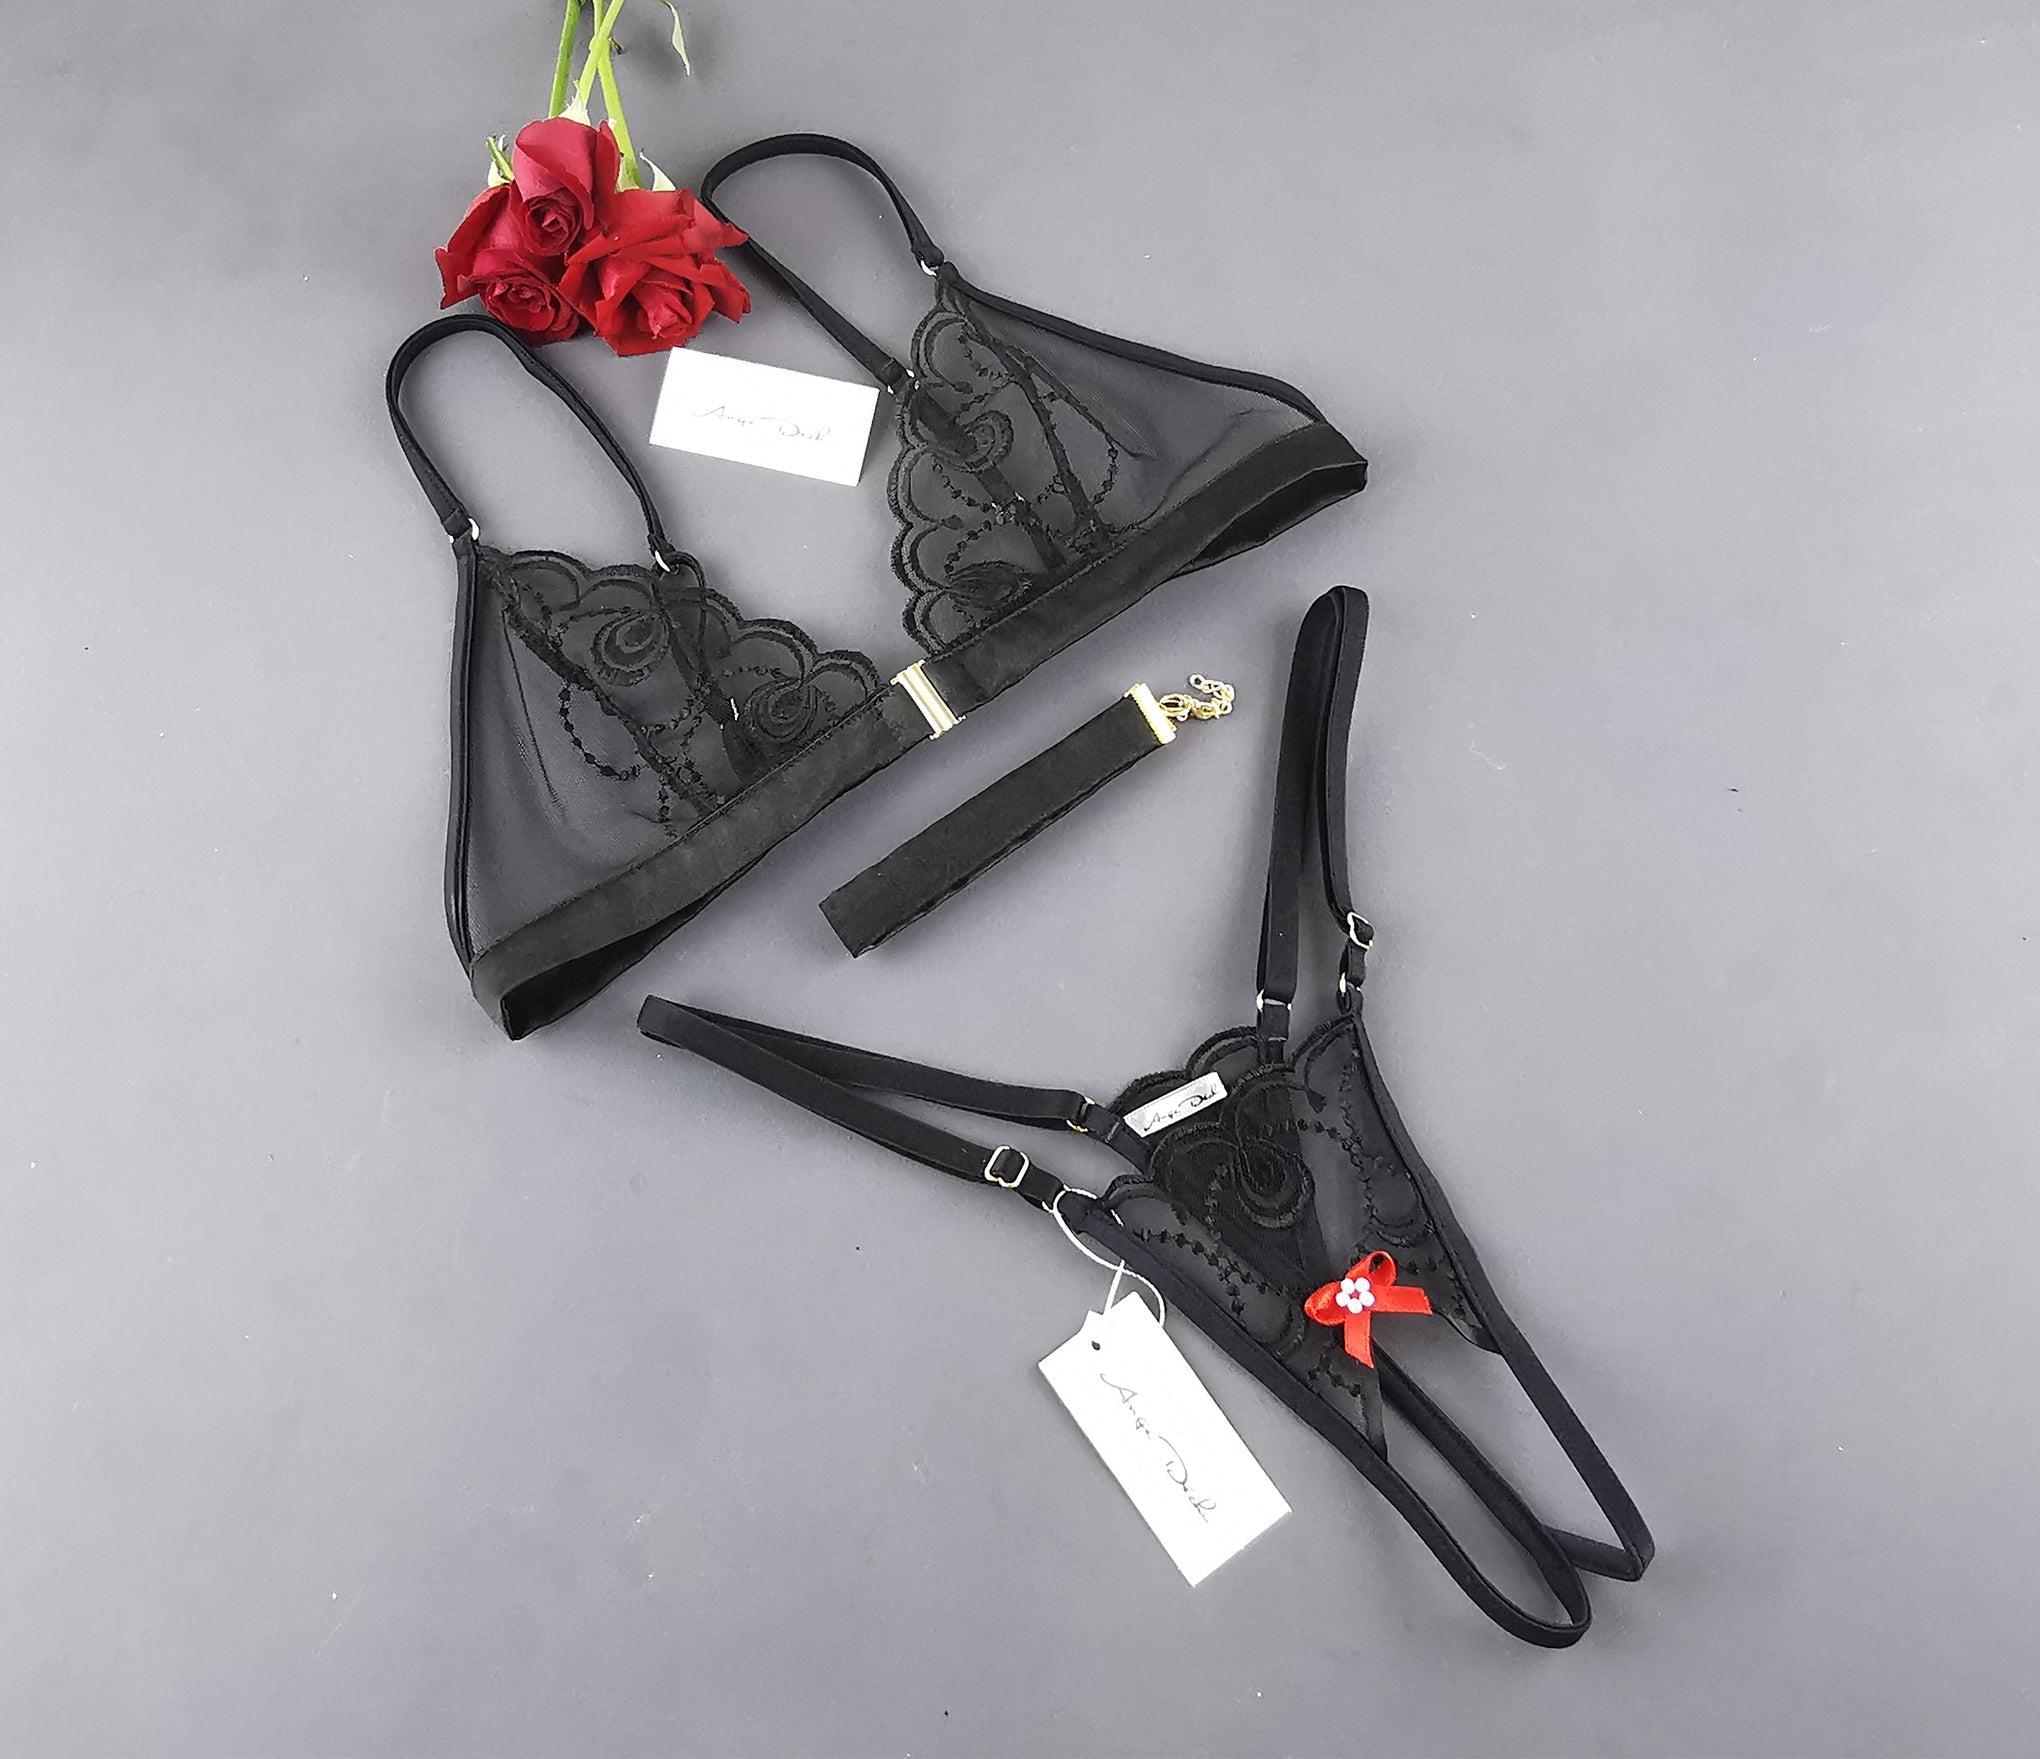 Sexy lingerie set with crotchless G string panties and bra in see through black lace open crotch sheer boudoir lingerie - Ange Déchu